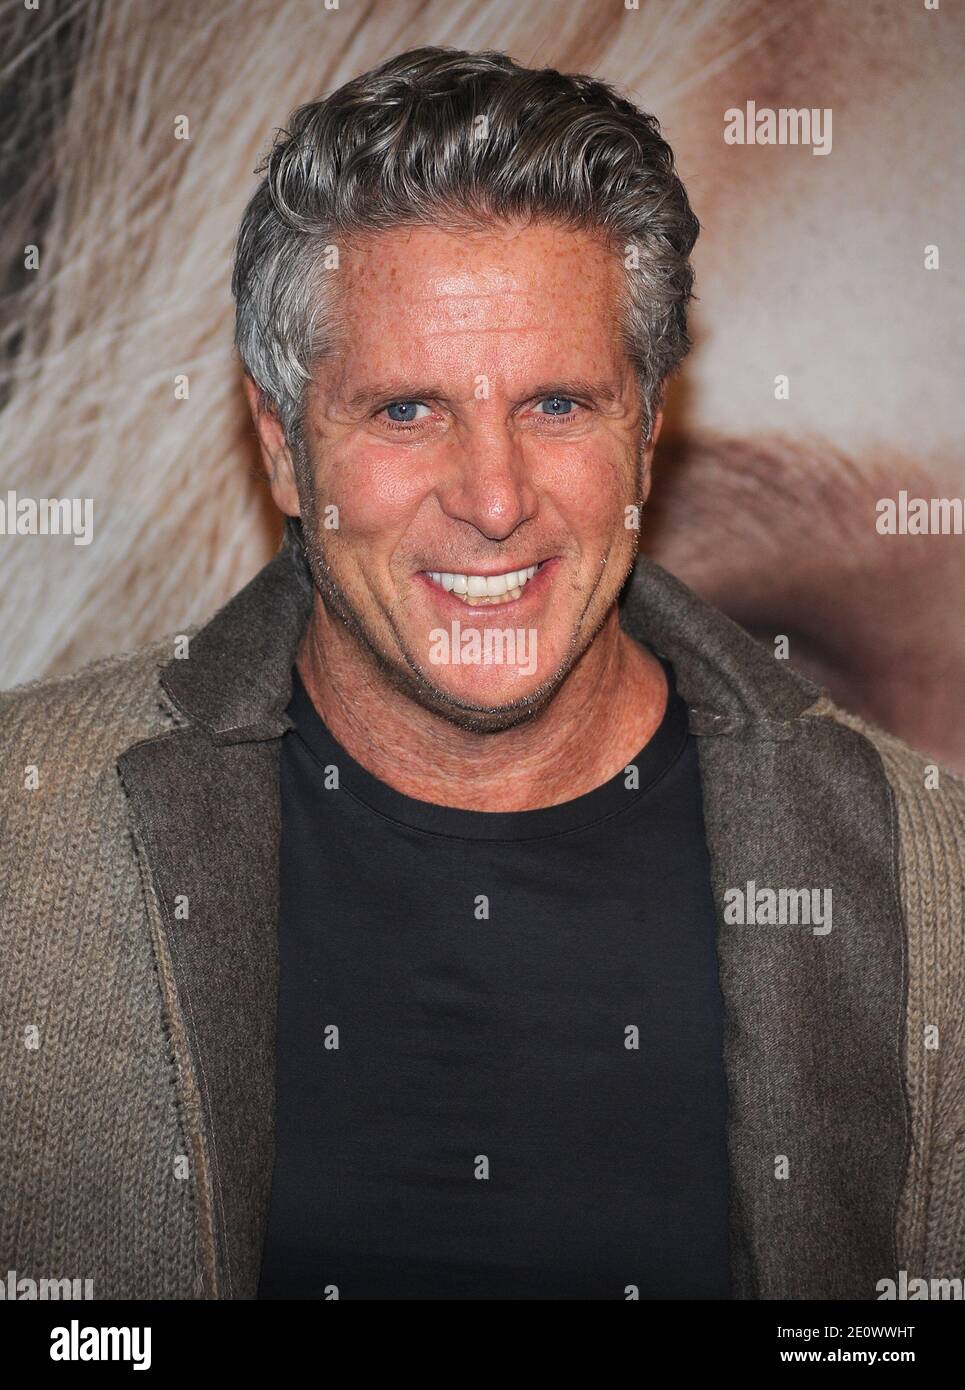 Donny Deutsch attending The World Premiere of 'Les Miserables' at The Ziegfeld Theater in New York City, NY, USA on December 10, 2012. Photo by Brad Barket/ABACAPRESS.COM Stock Photo